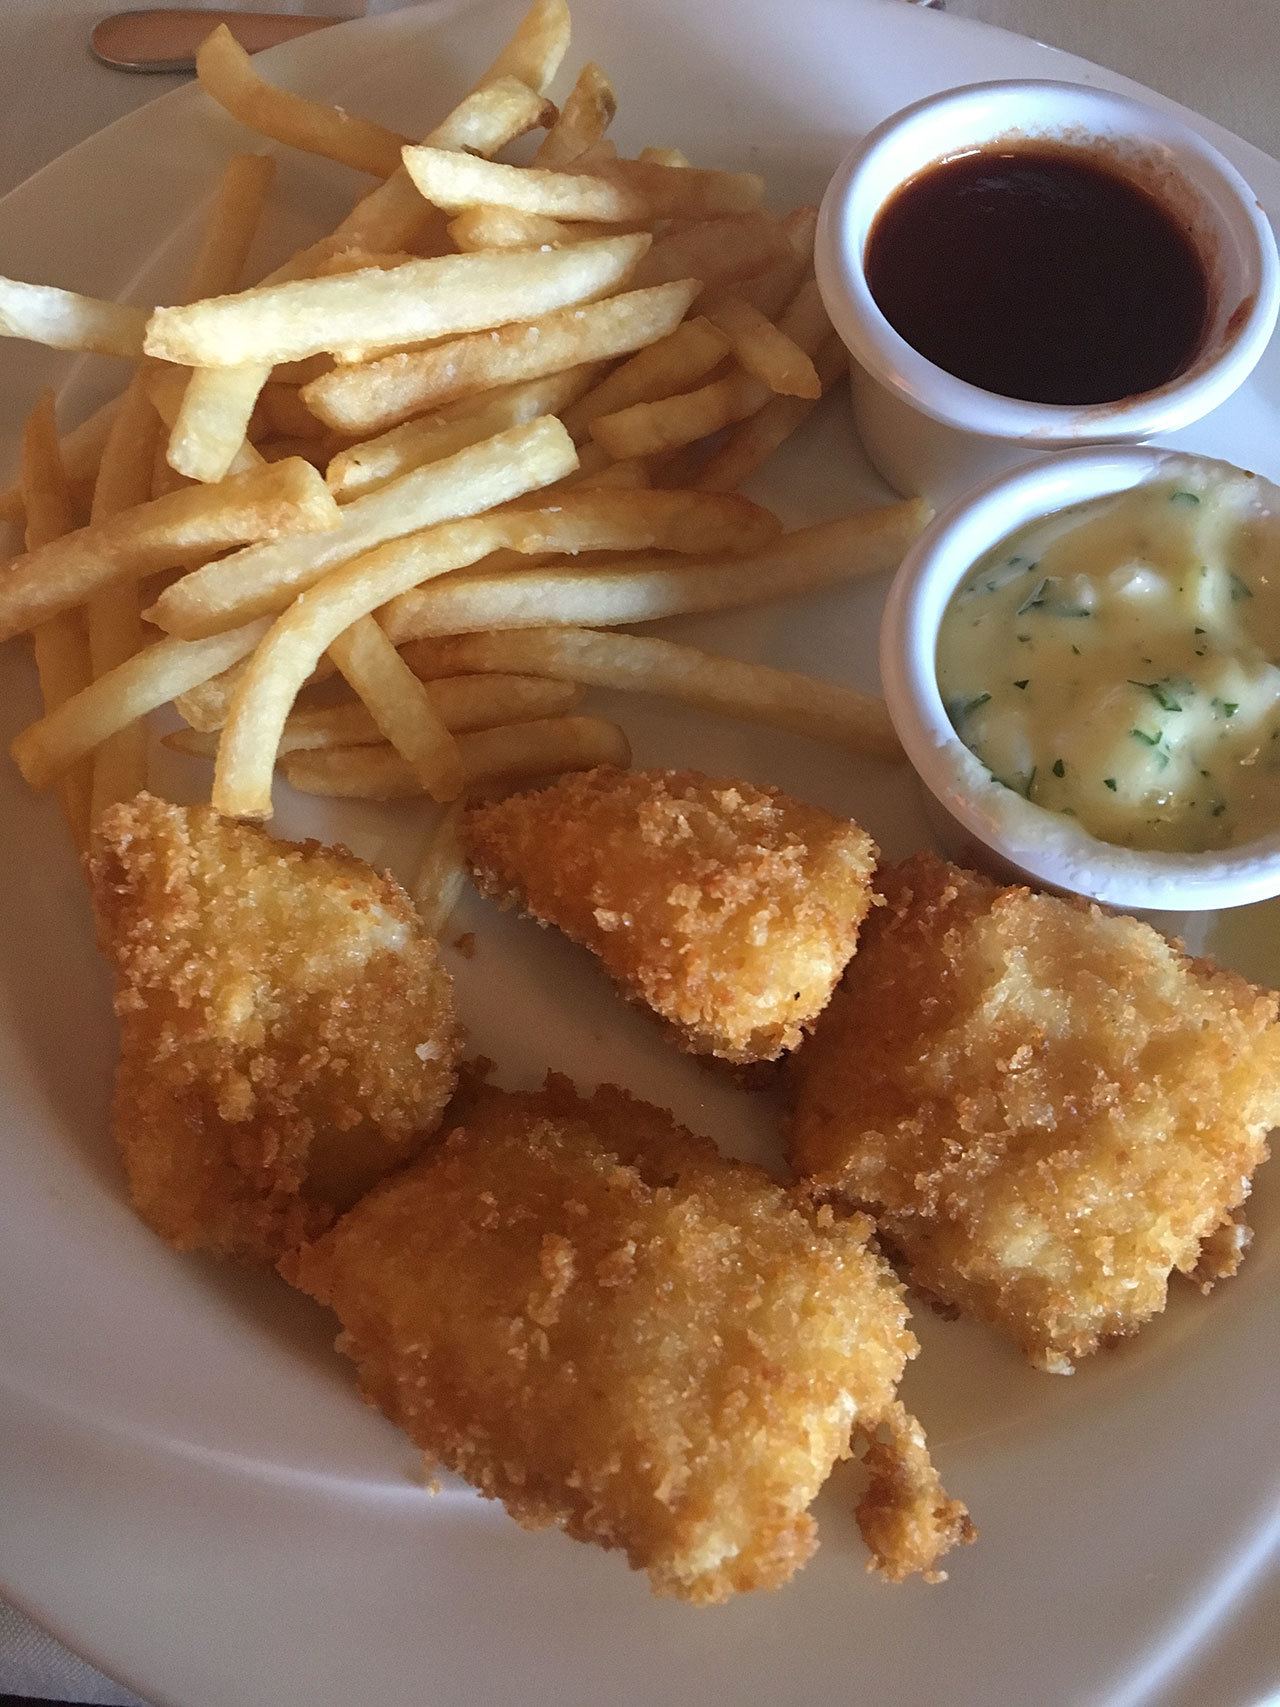 A chef’s special of fish & chips at Le Bistro, the student-run restaurant at the Sno-Isle TECH Skills Center, is $8. (Ben Watanabe photo)